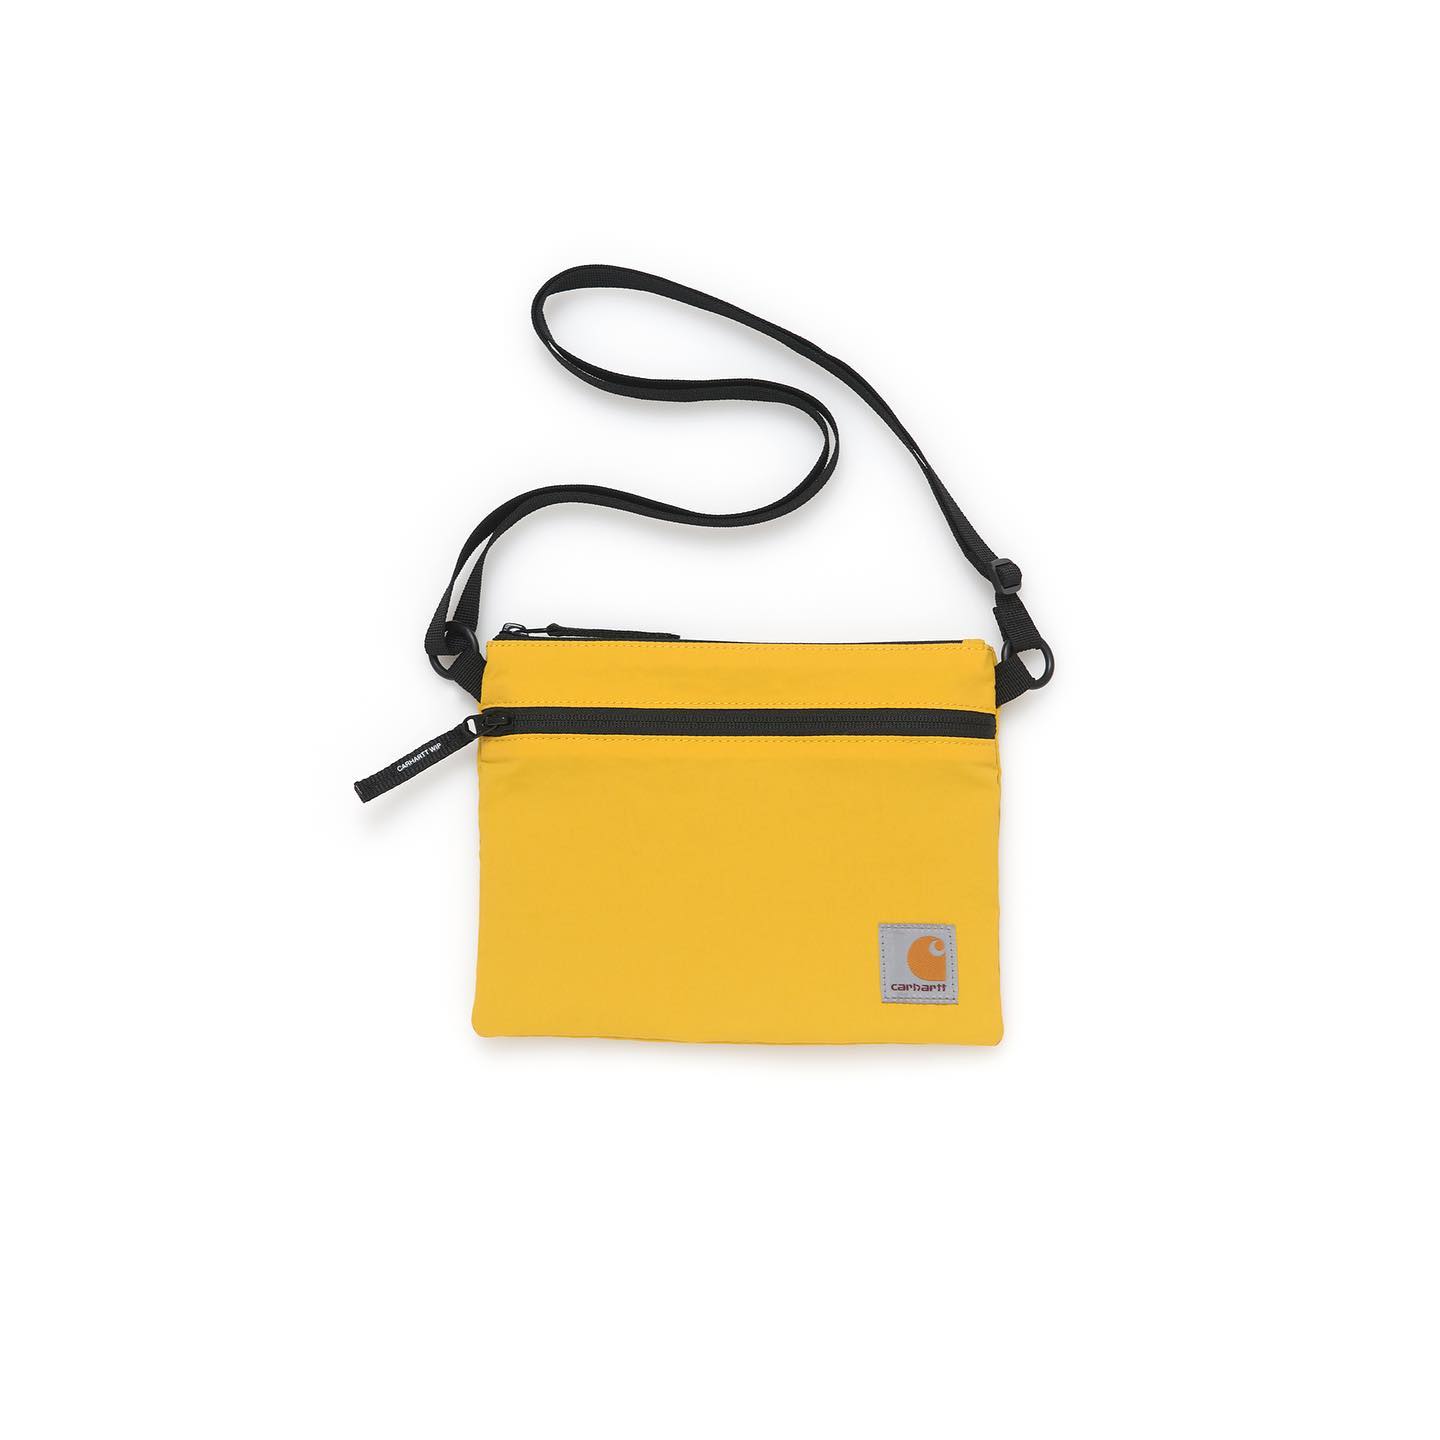 Check out the FW19 Carhartt WIP Jacob Bag in a brand new colorway! 